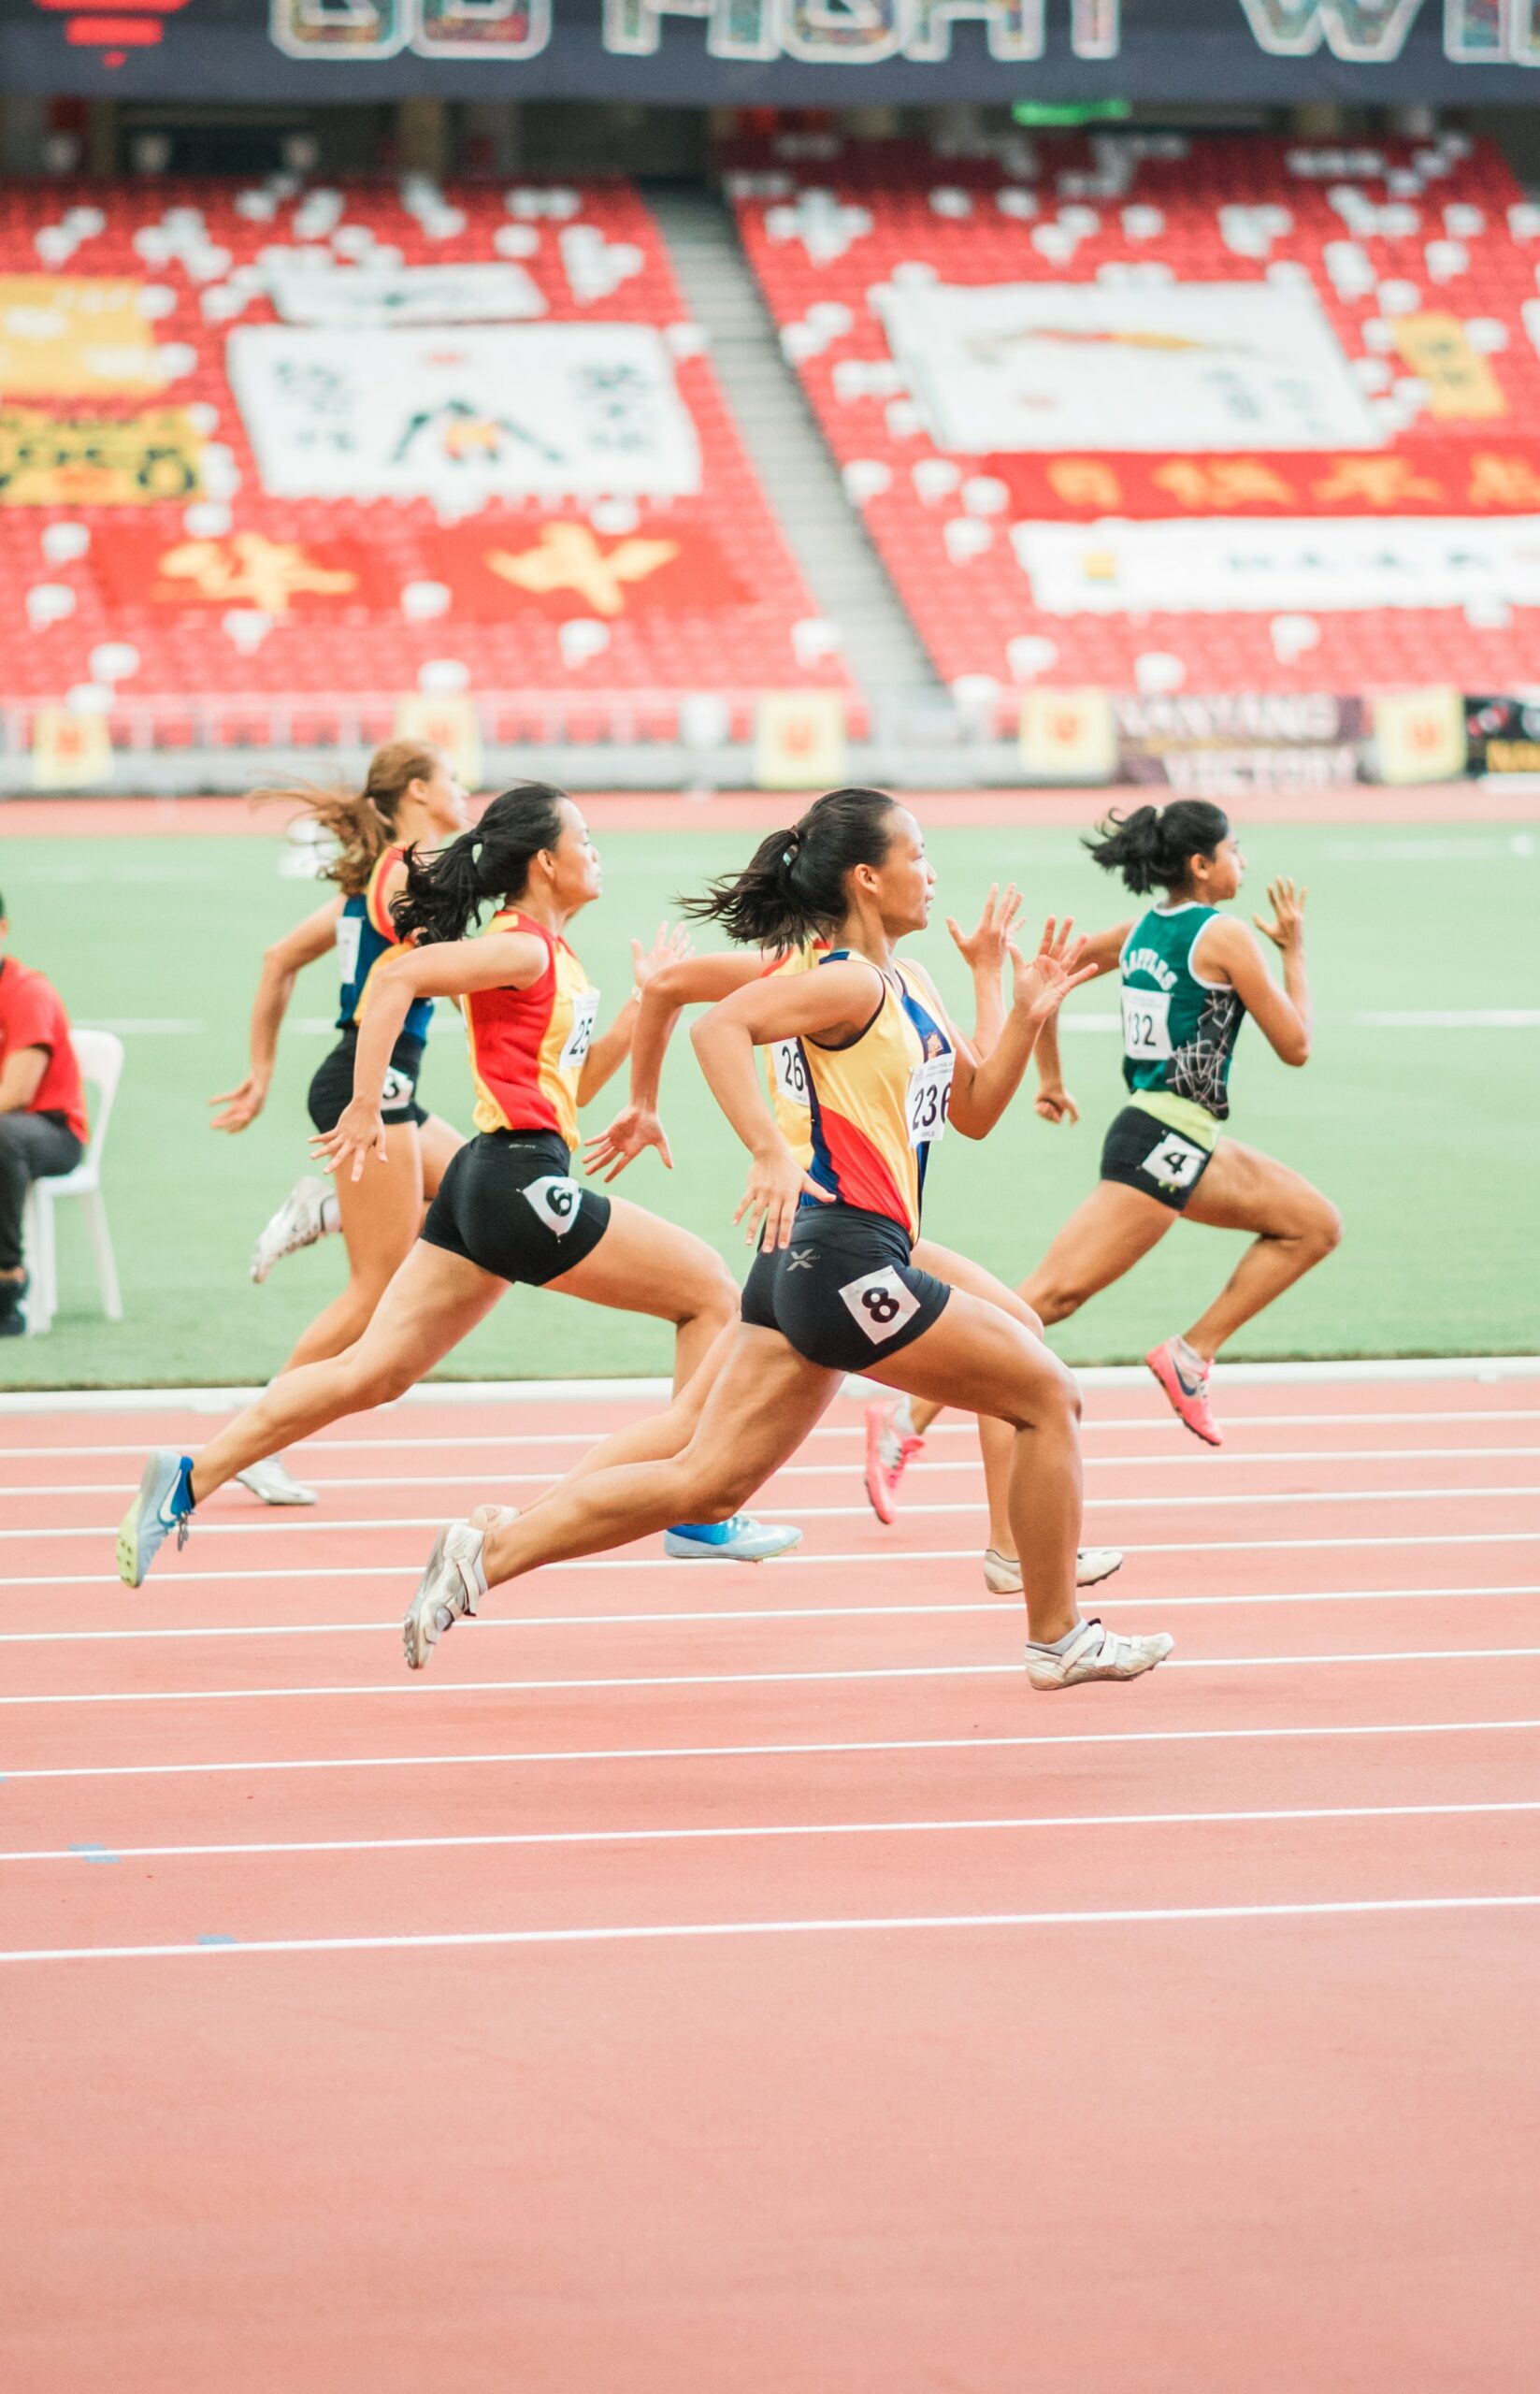 Shot of runners sprinting during a race. One runner has a clear advantage.